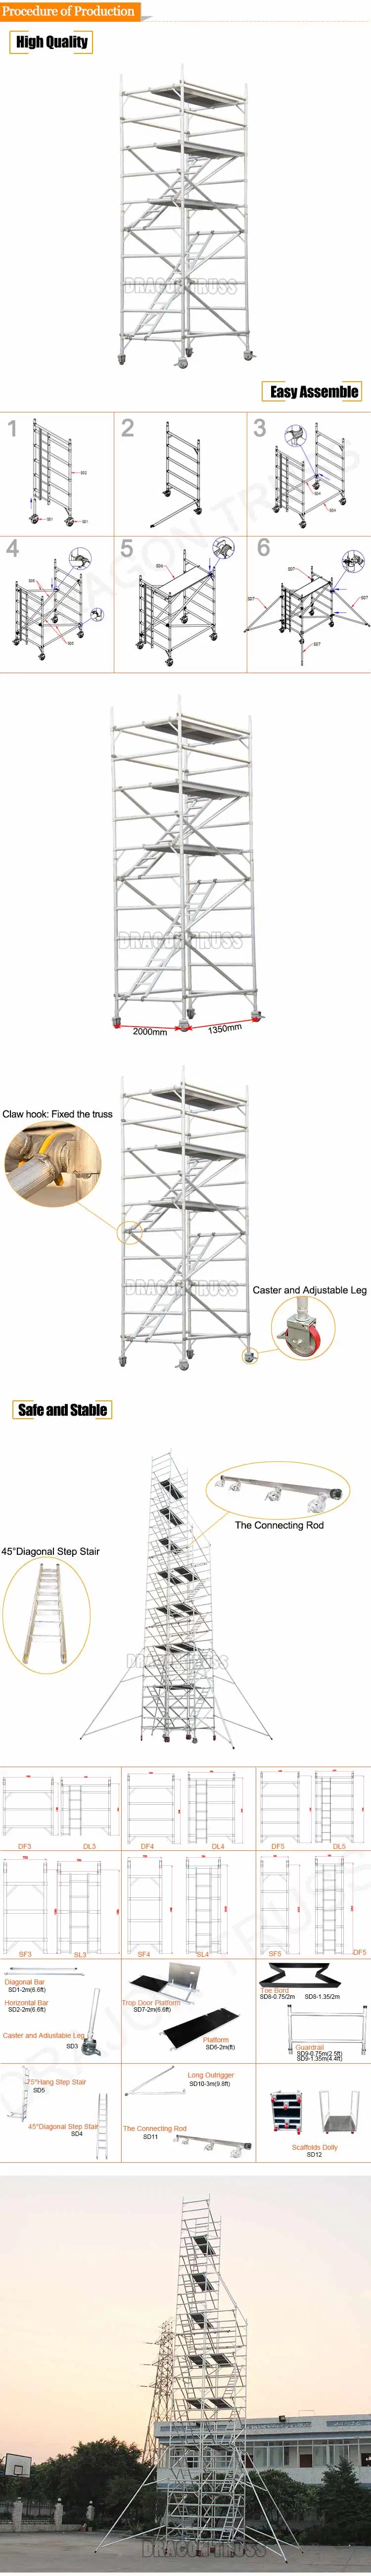 Dragonstage Aluminum Step-Stair Scaffolding and Ladders Frame System Scaffold Mobile Scaffolding Portable Staging Scaffold for Construction